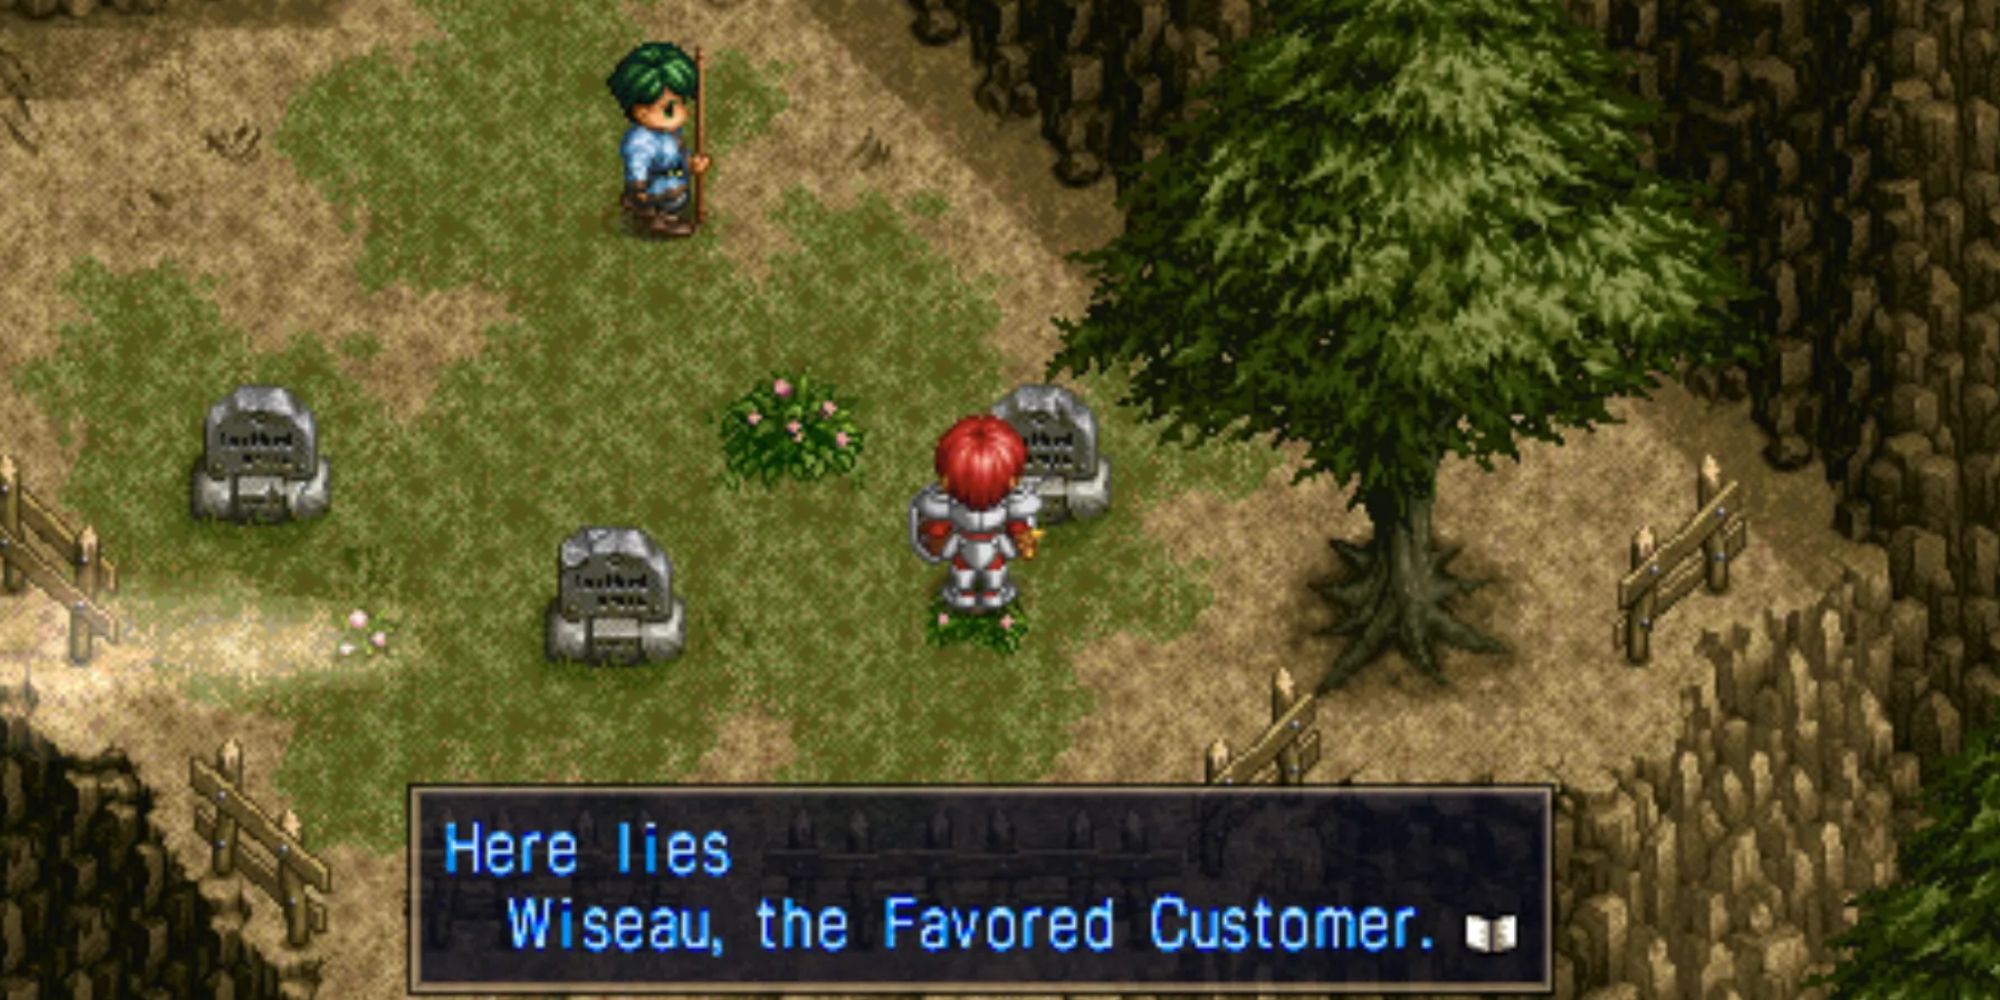 Ys 2 Adol looking at a grave sight